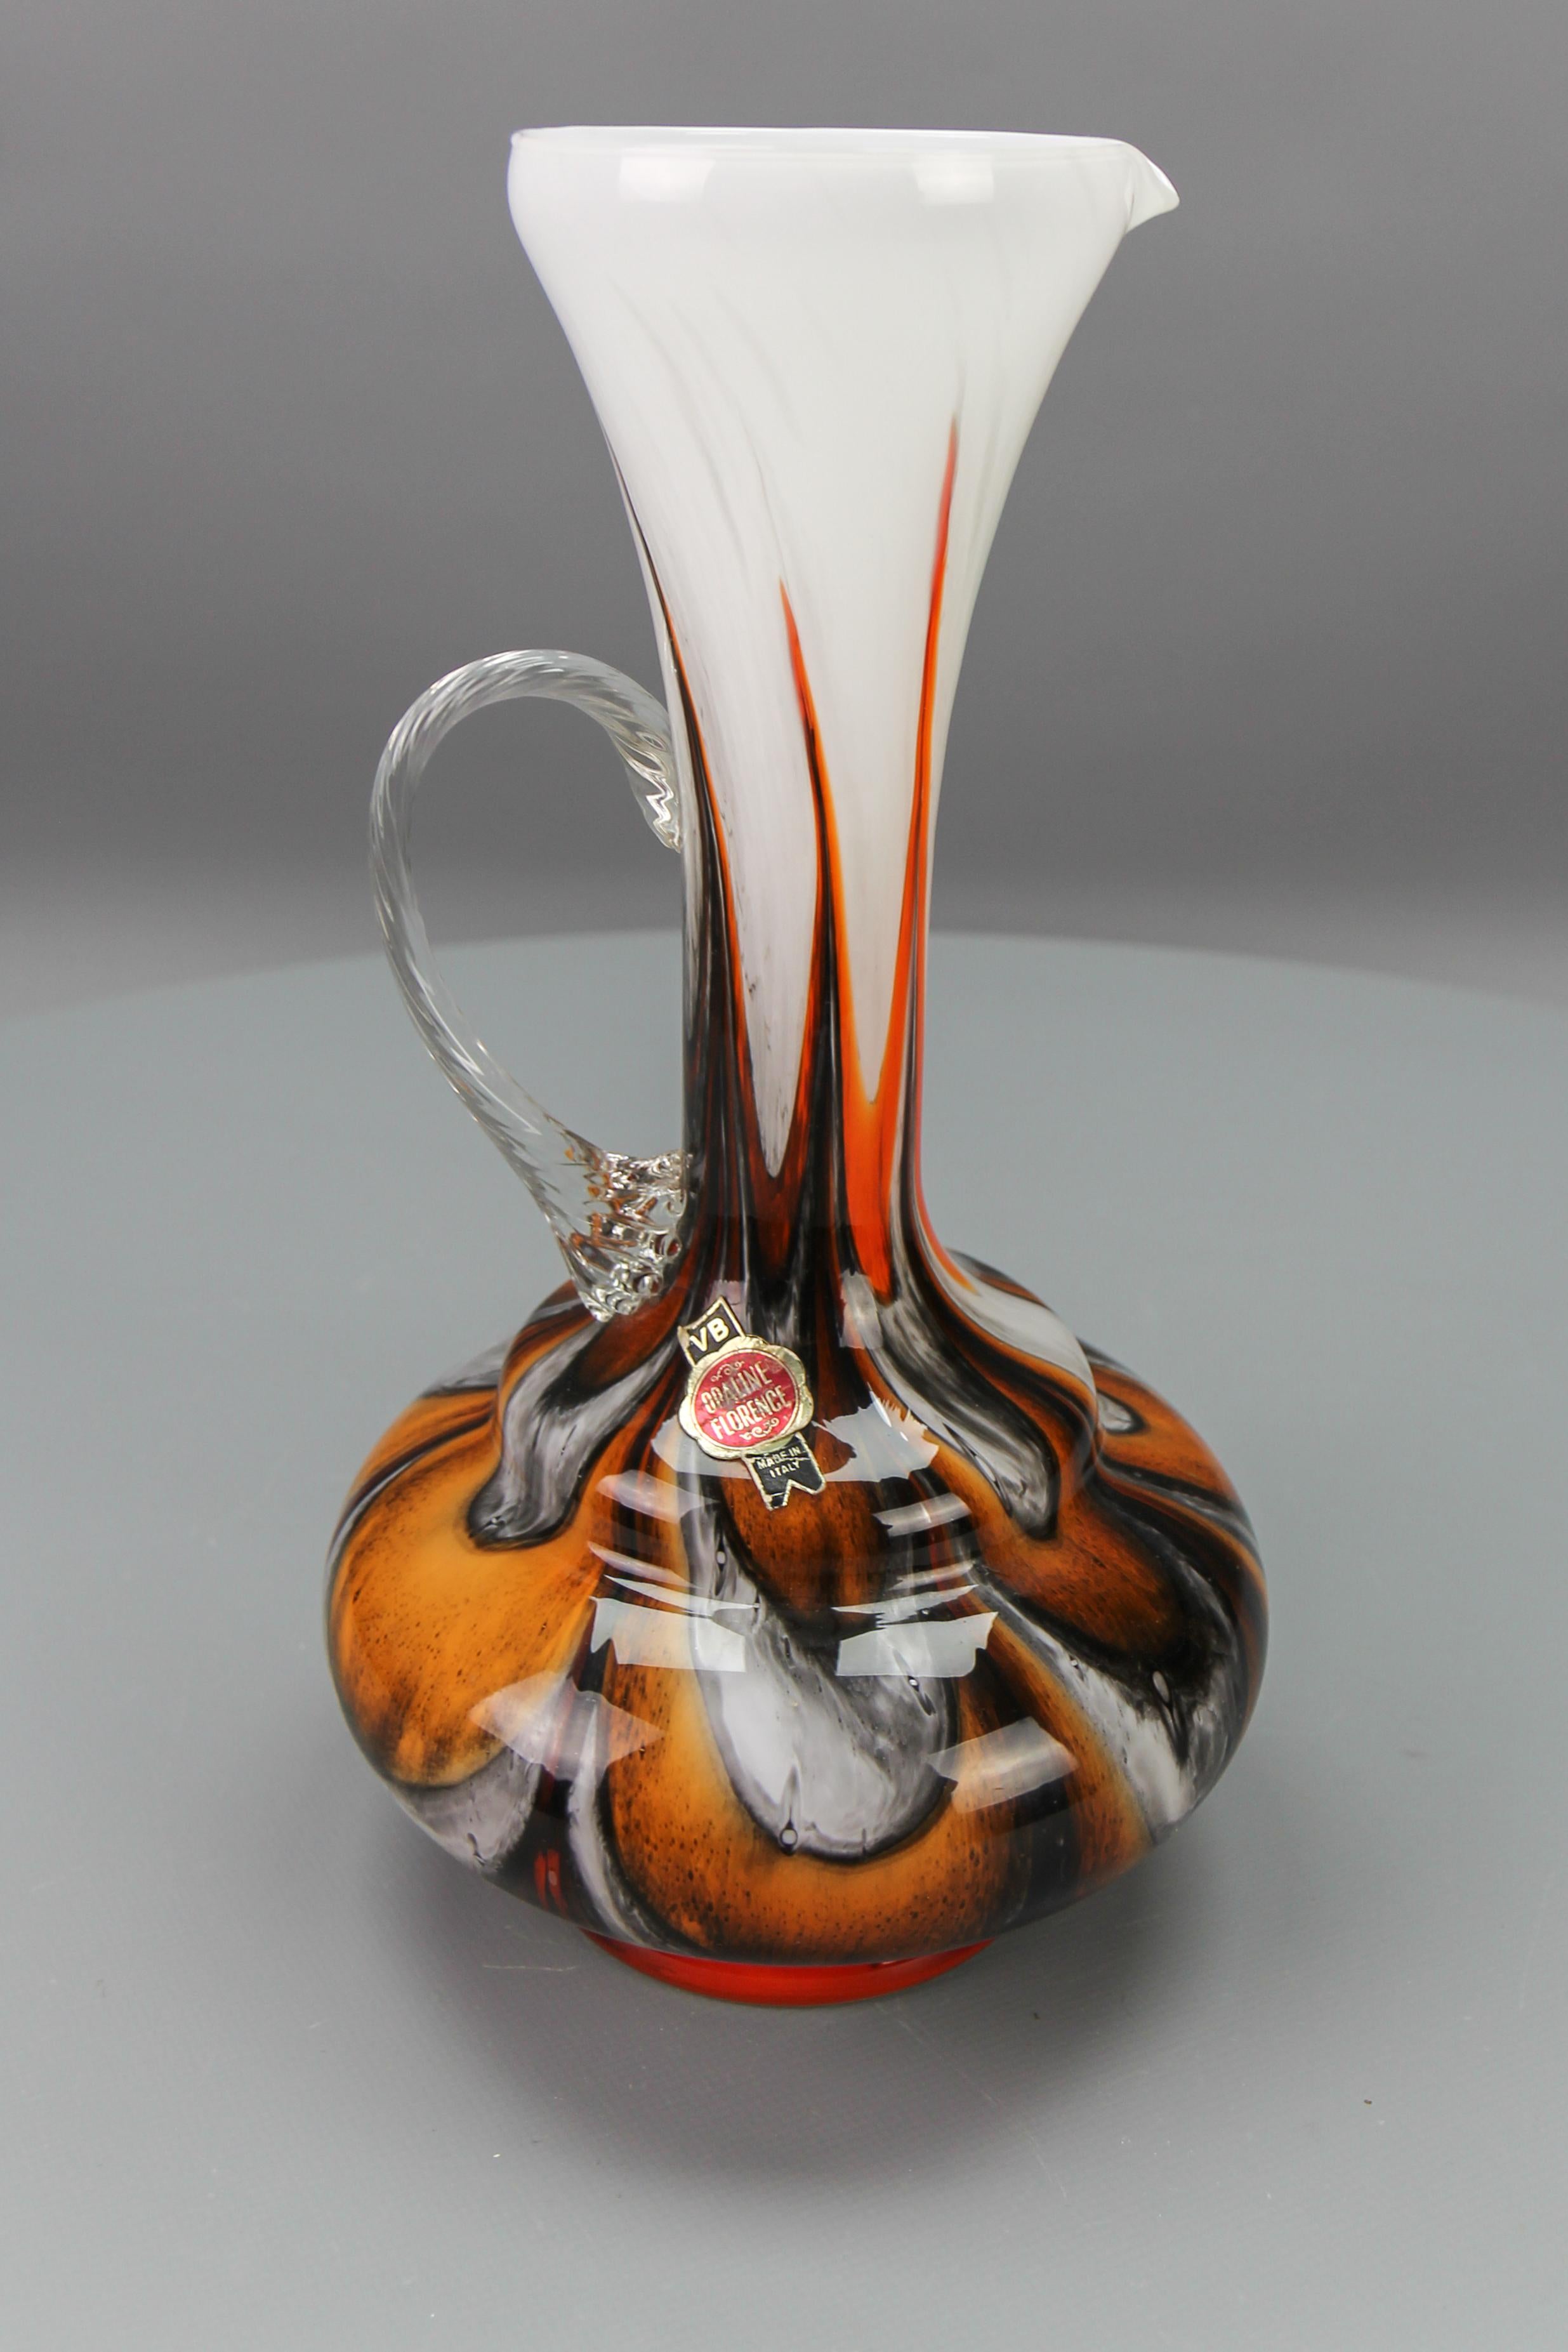 Italian Opaline Florence glass vase in white, brown, orange, and red by Vetreria Barbieri, circa the 1970s.
A beautiful polychrome brown, orange, red, white, and grey marbled vase, pitcher, or jug with a clear glass handle, made in the region of